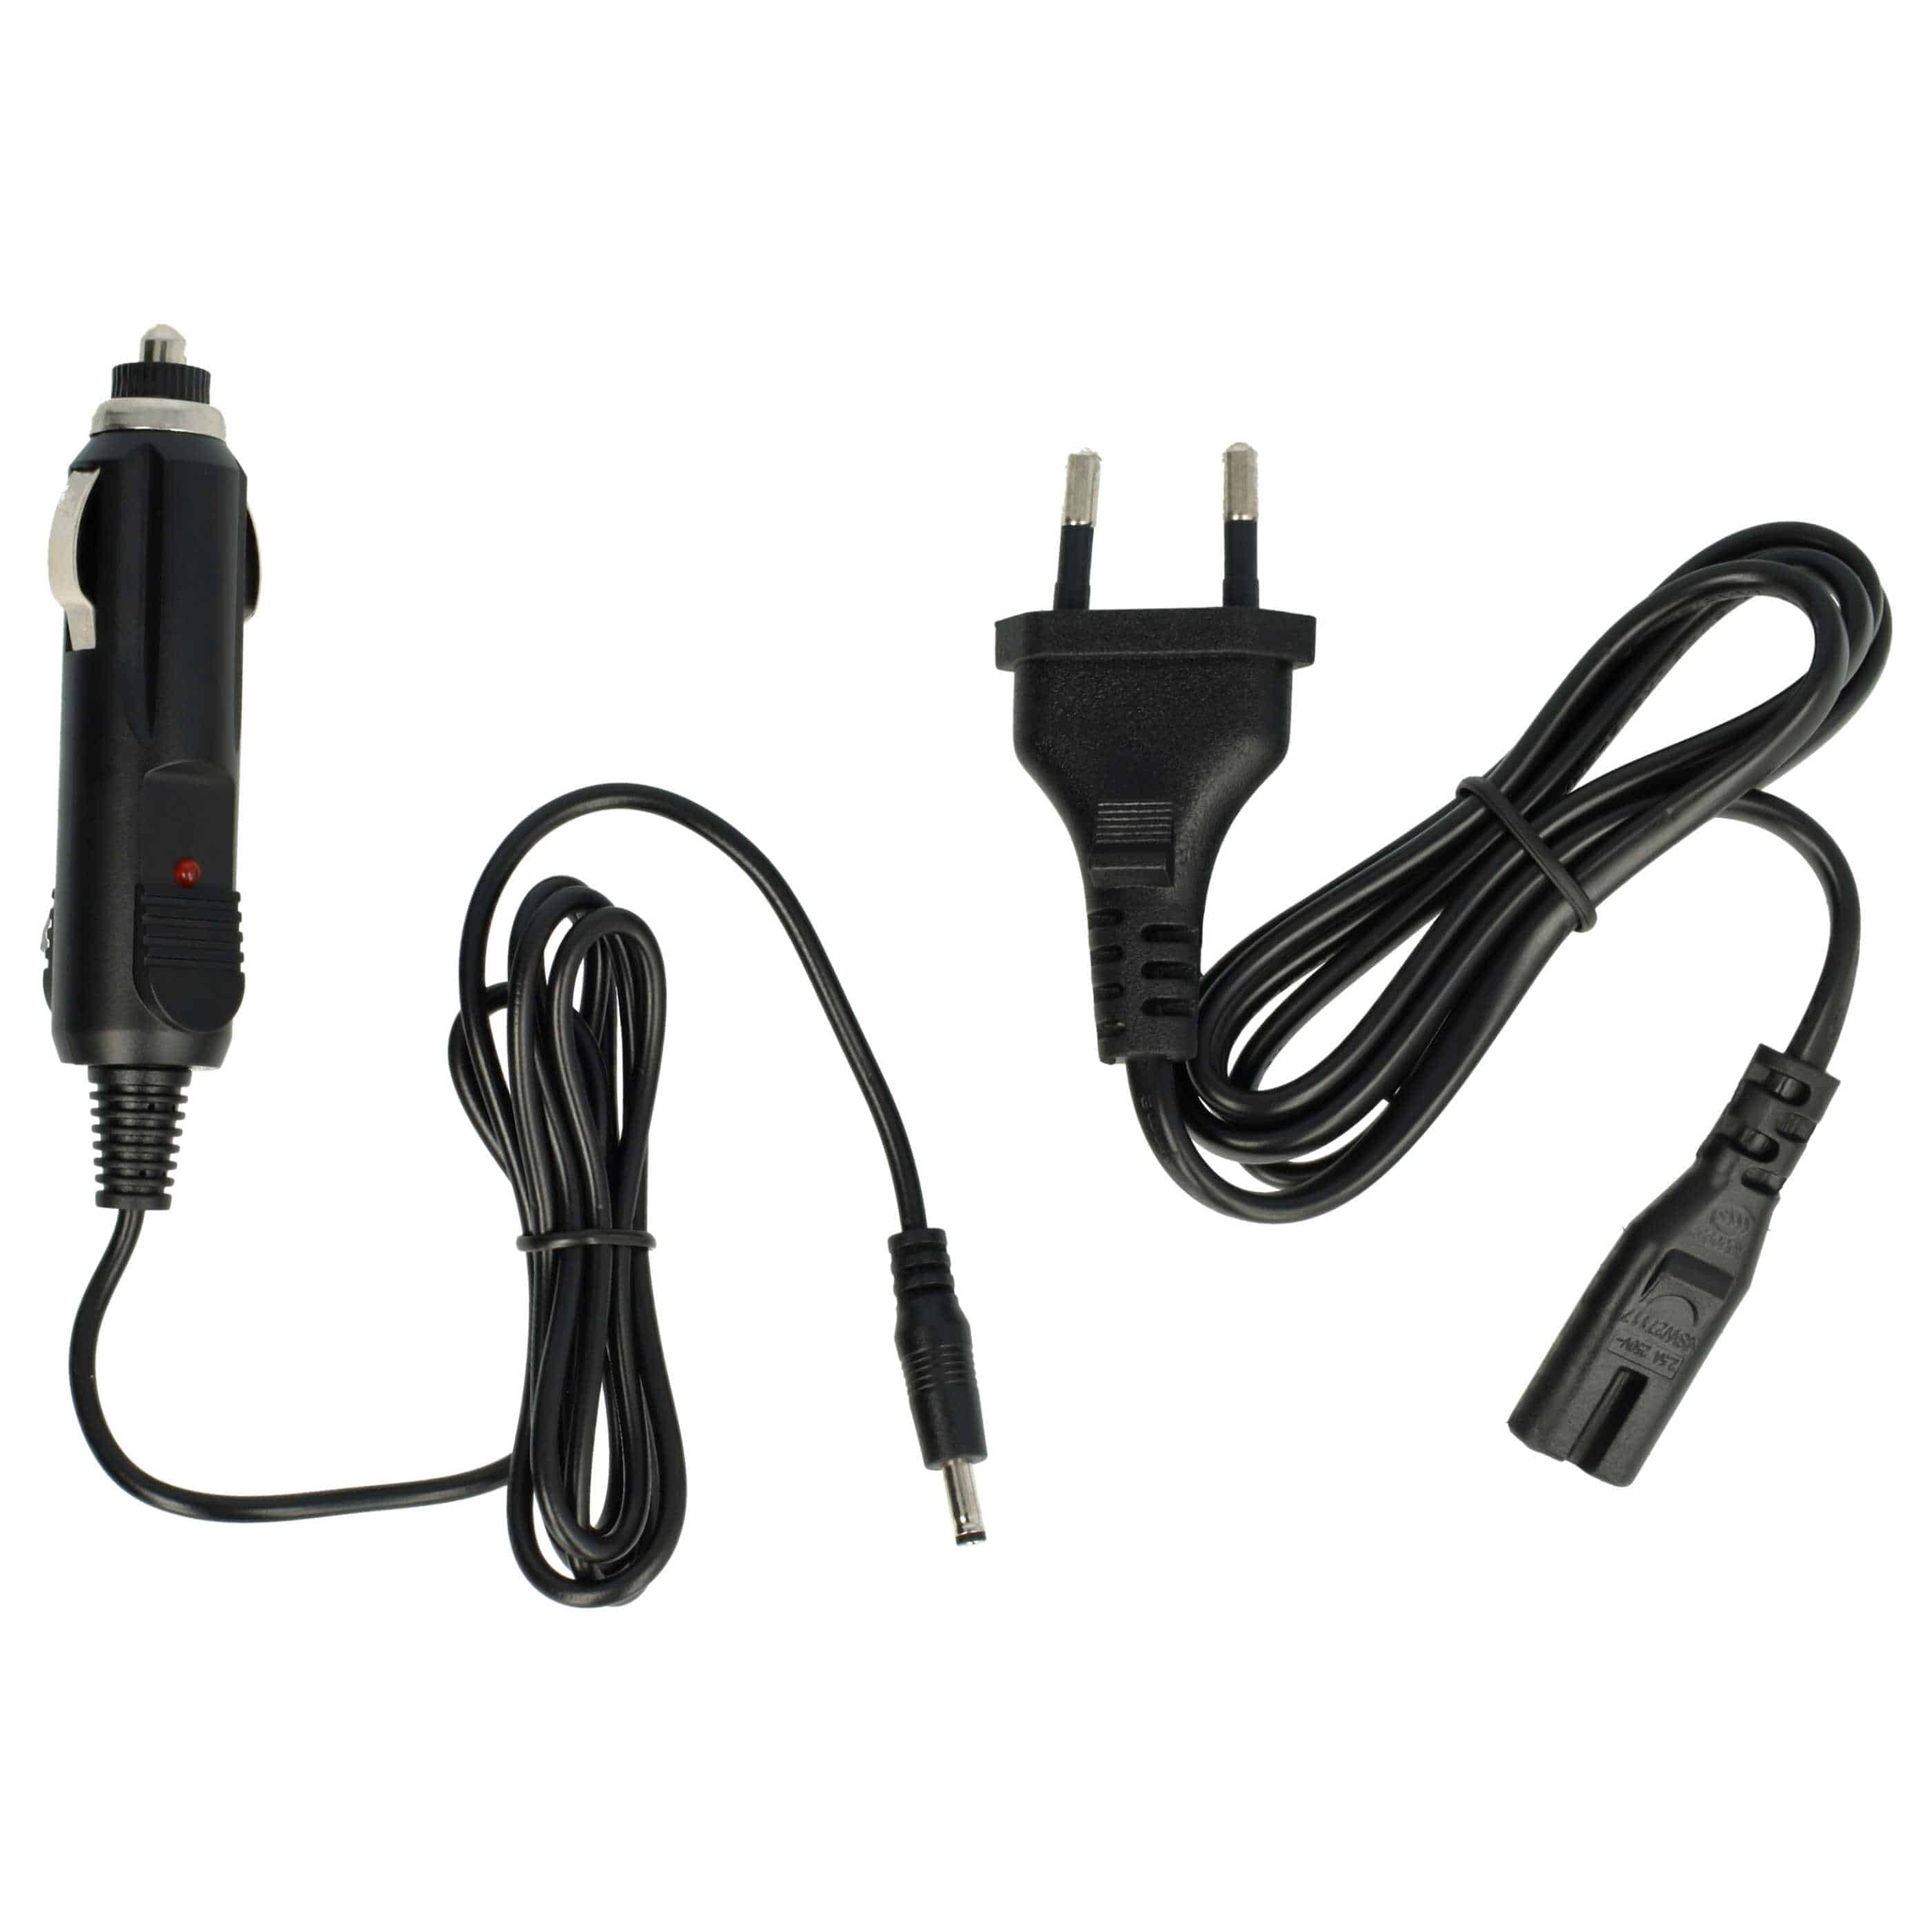 Battery Charger suitable for FinePix S5 Pro Camera etc. - 0.6 A, 8.4 V